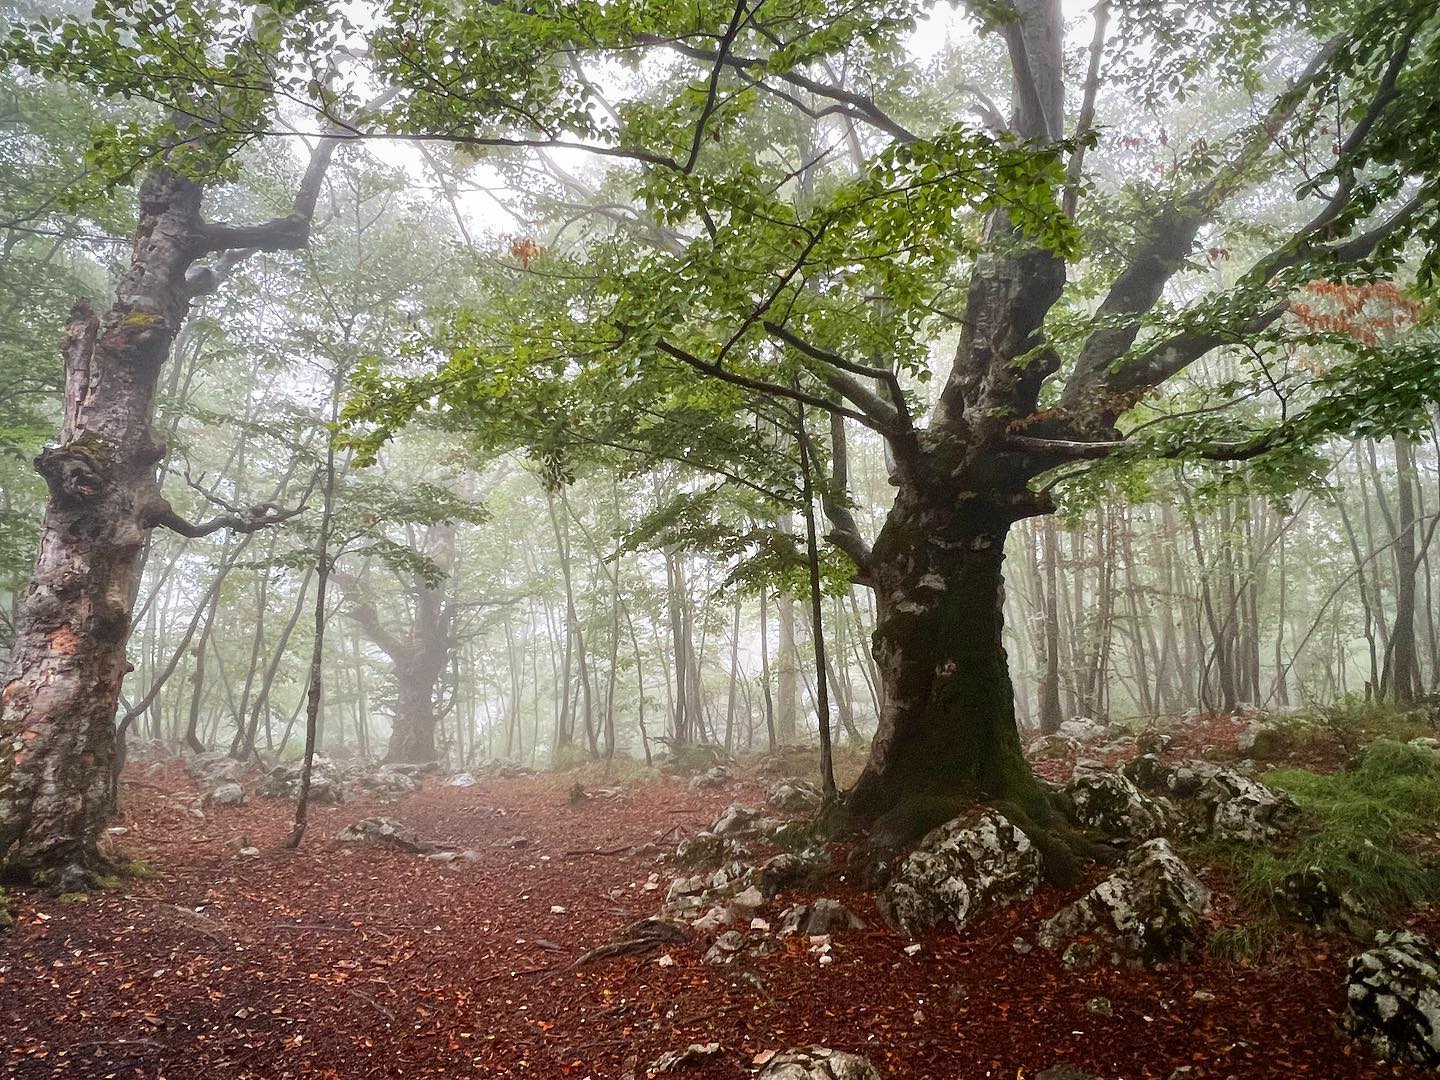 old #beech in #fog in amazing #forests of #Tara national park in #serbia #landscape #landscapephotography #travel #shotoniphone #iphone13pro